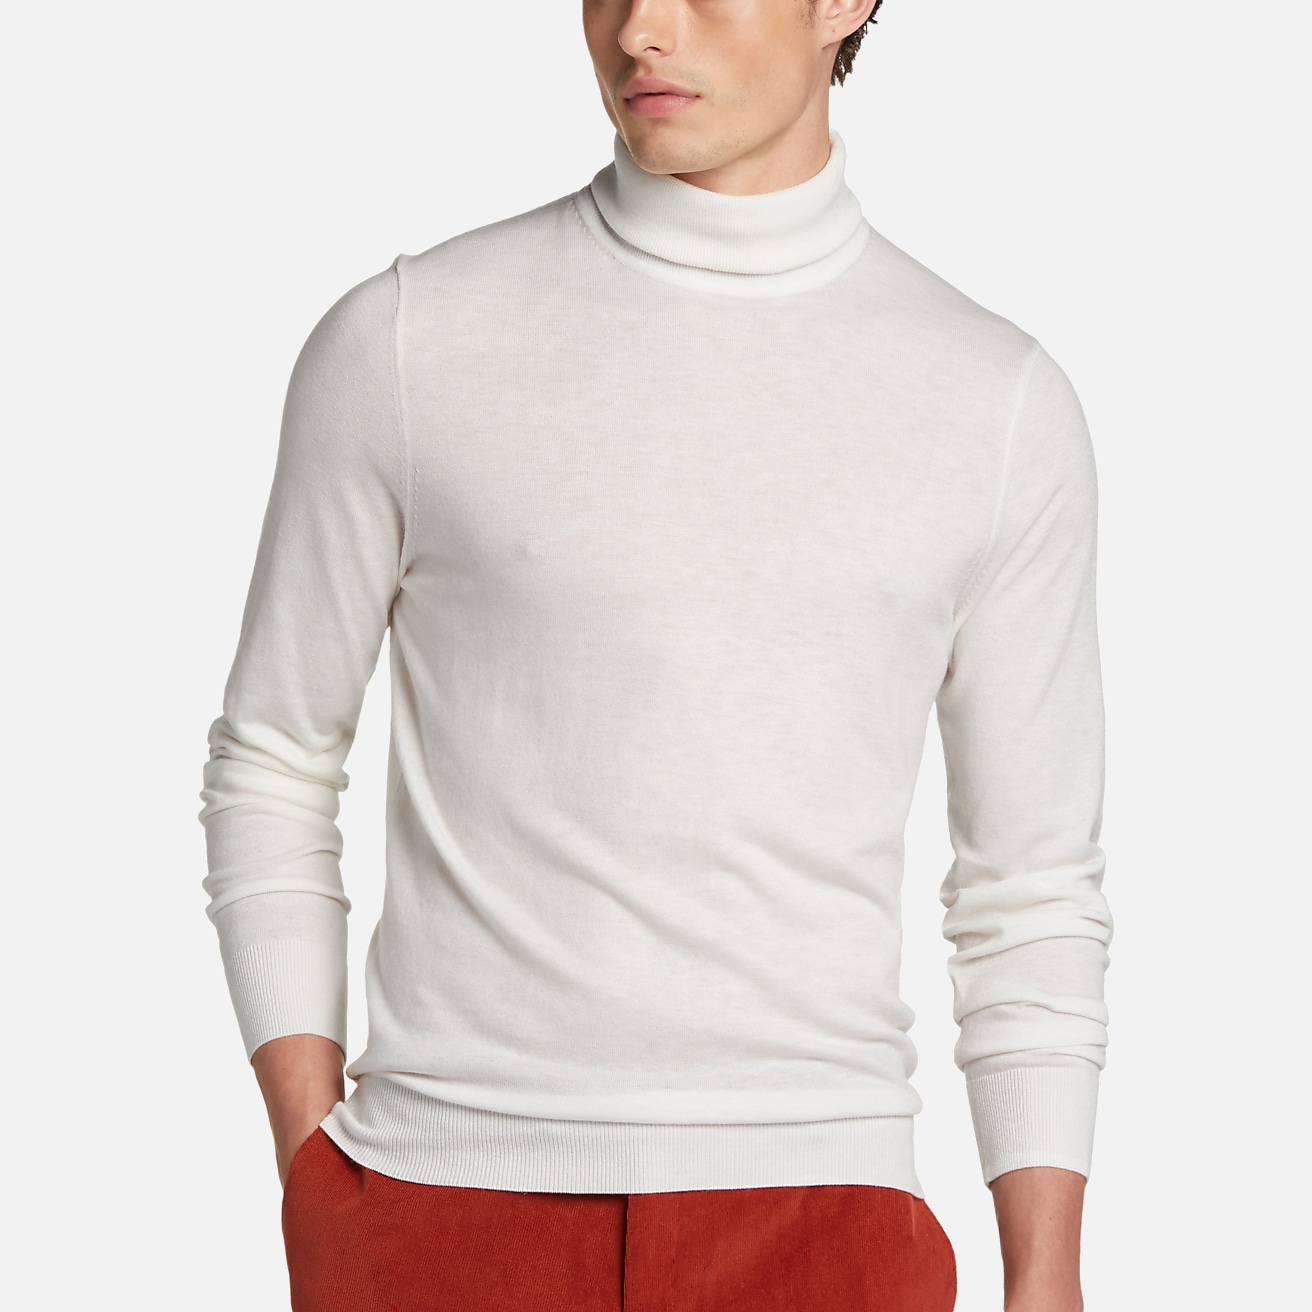 Paisley & Gray Slim Fit Turtleneck Sweater, All Sale